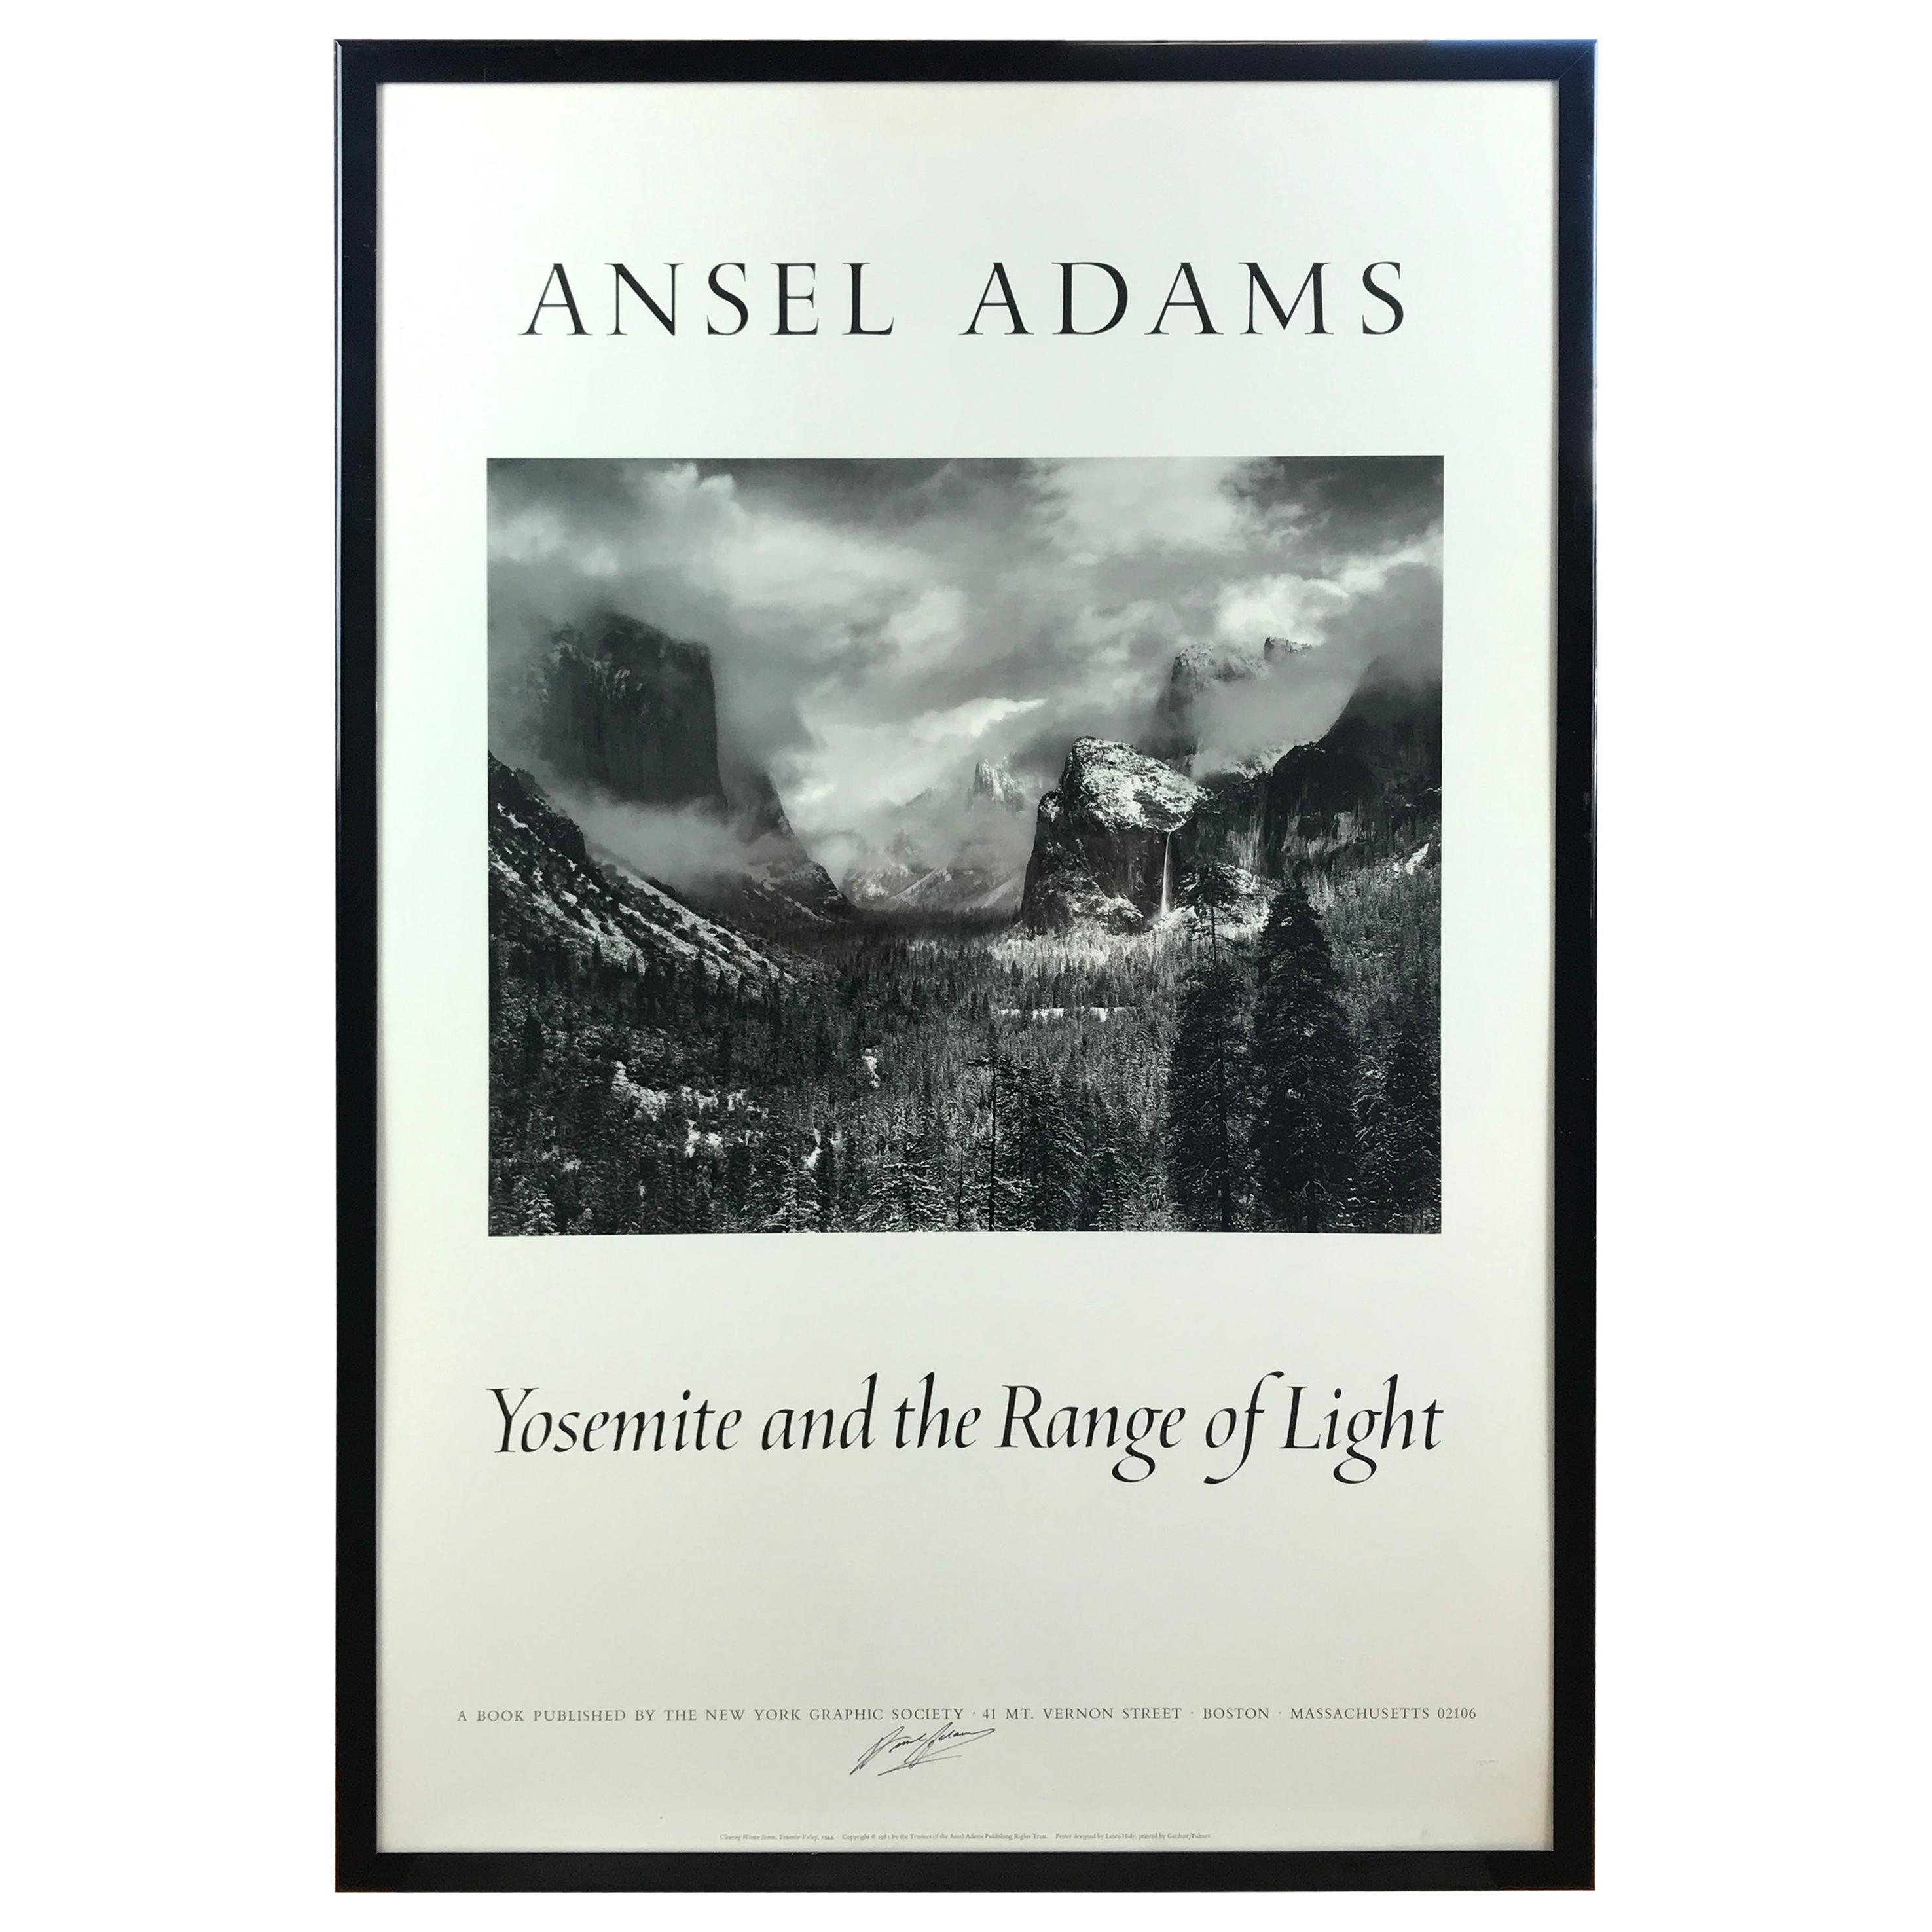 Ansel Adams "Yosemite and the Range of Light" Poster Signed